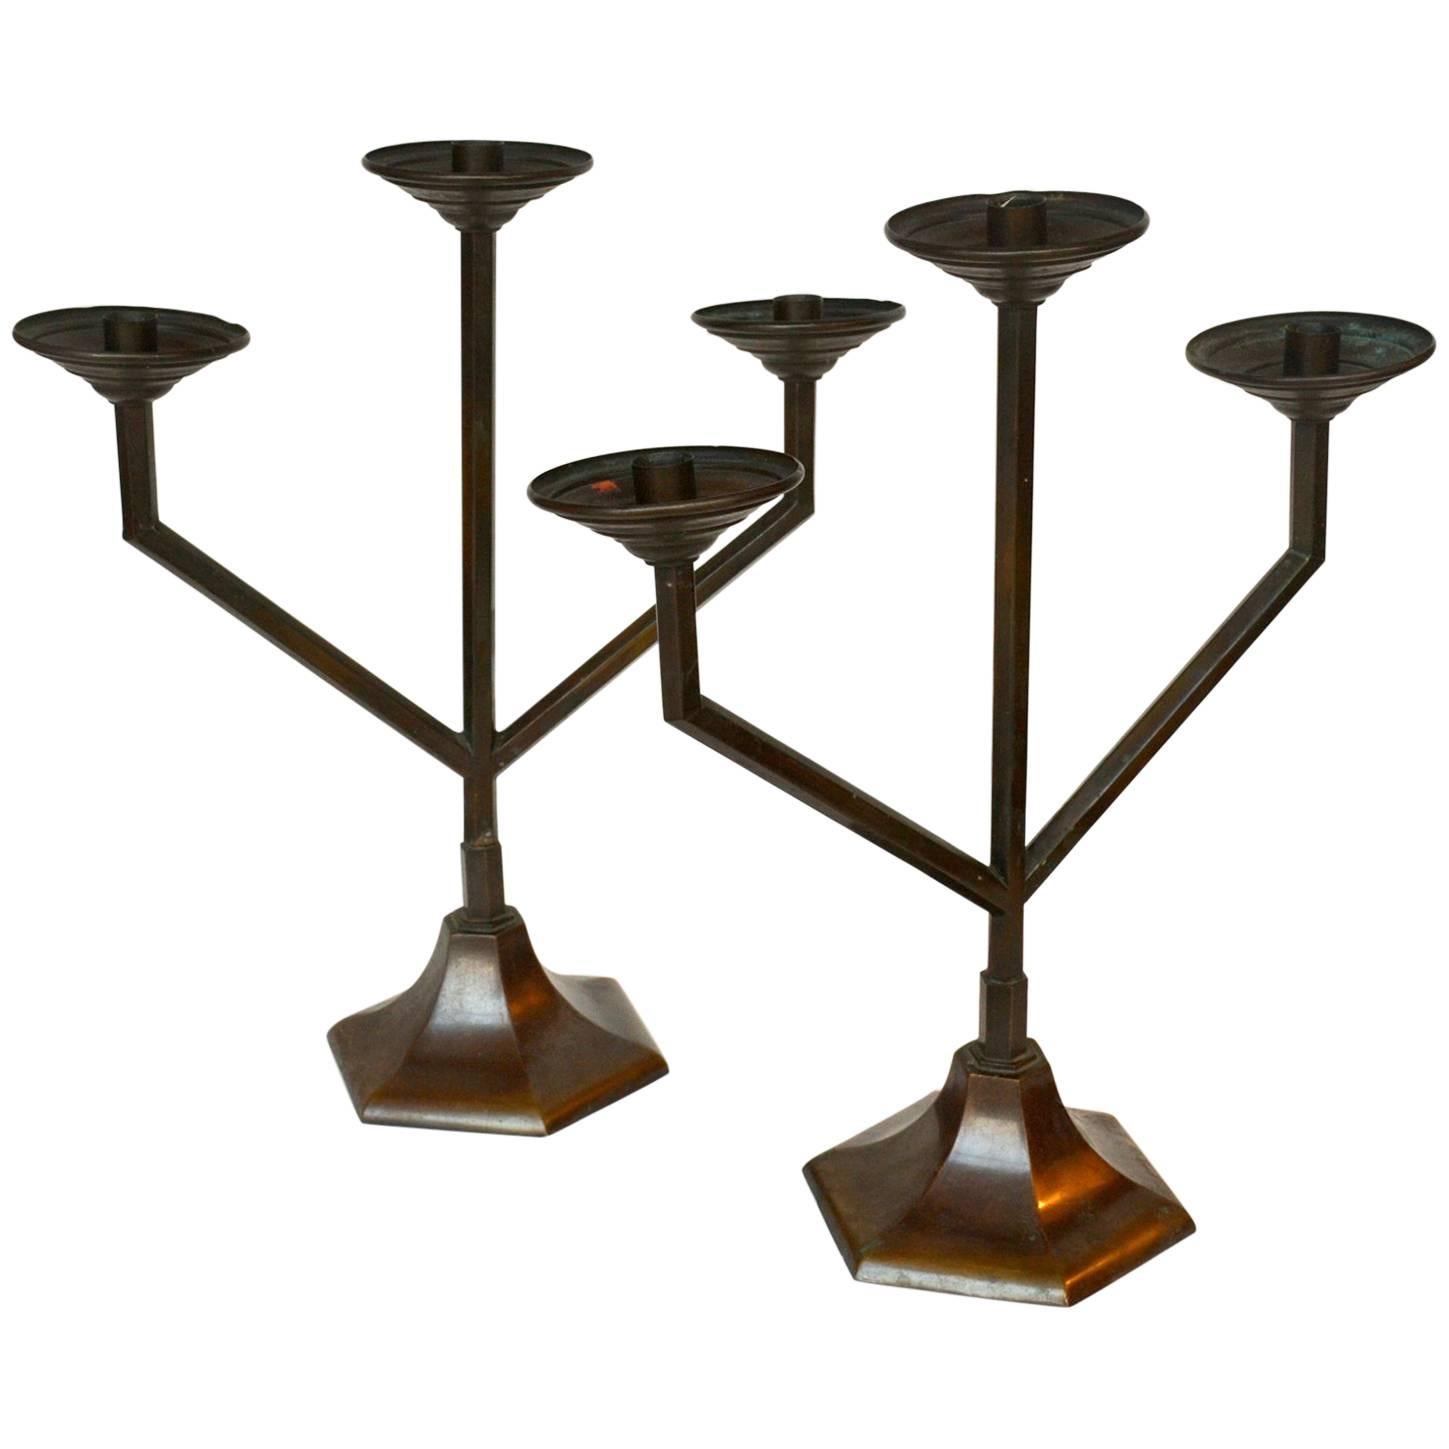 1930's Pair of Modernist Dutch Triple Arm Candle Holders